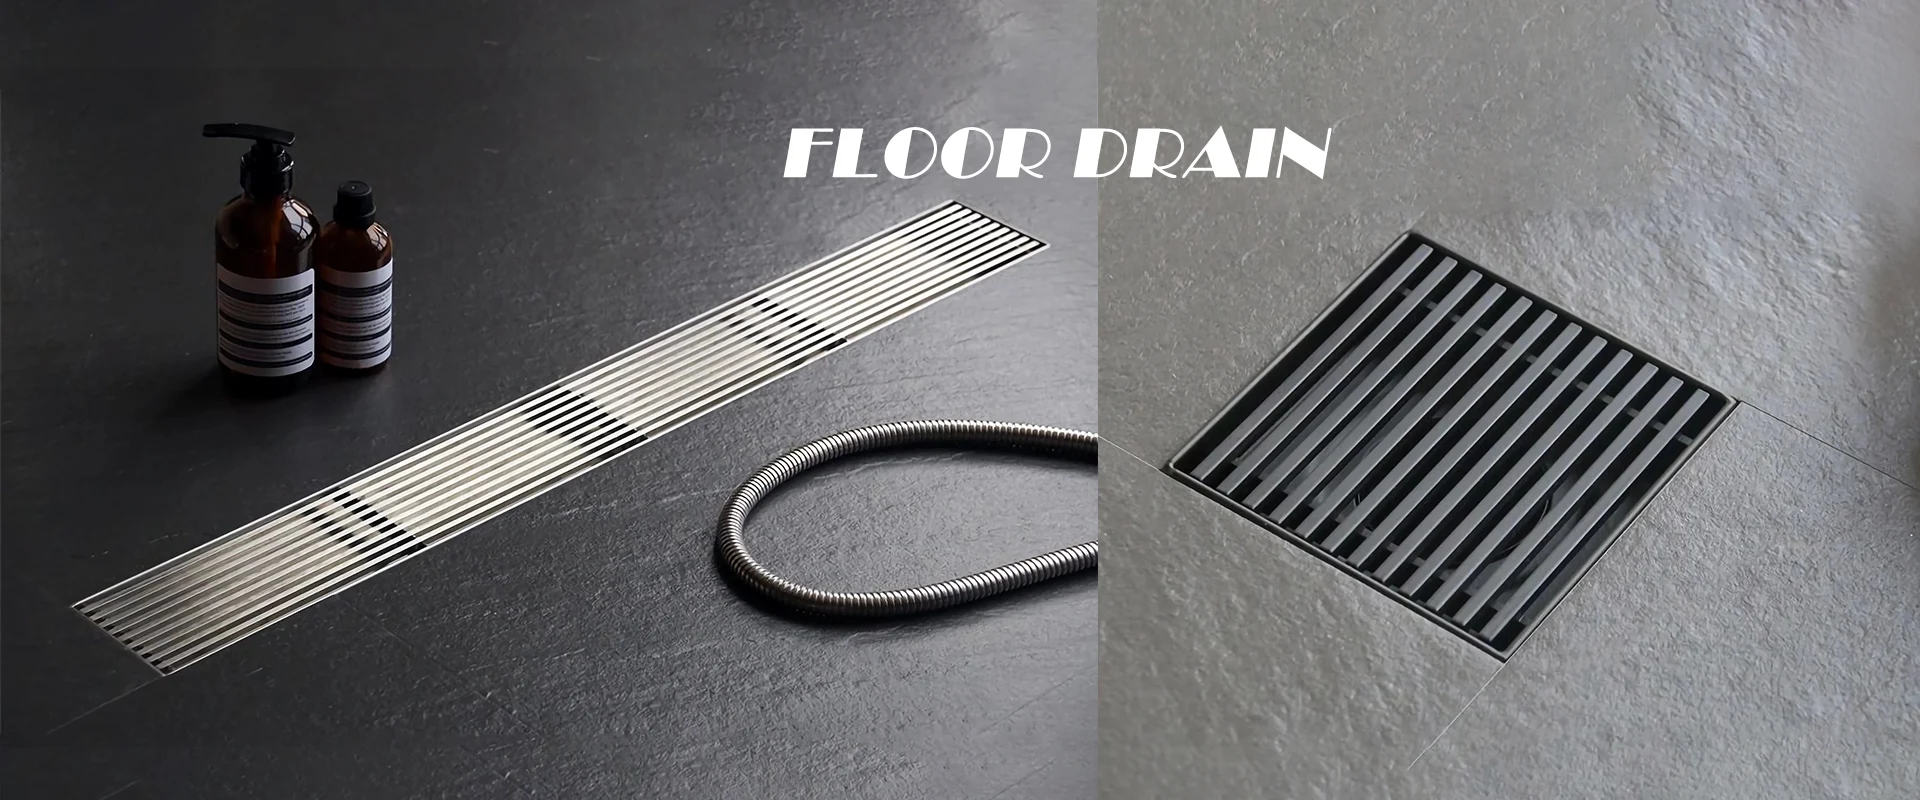 High Quality Floor Drain Made in China